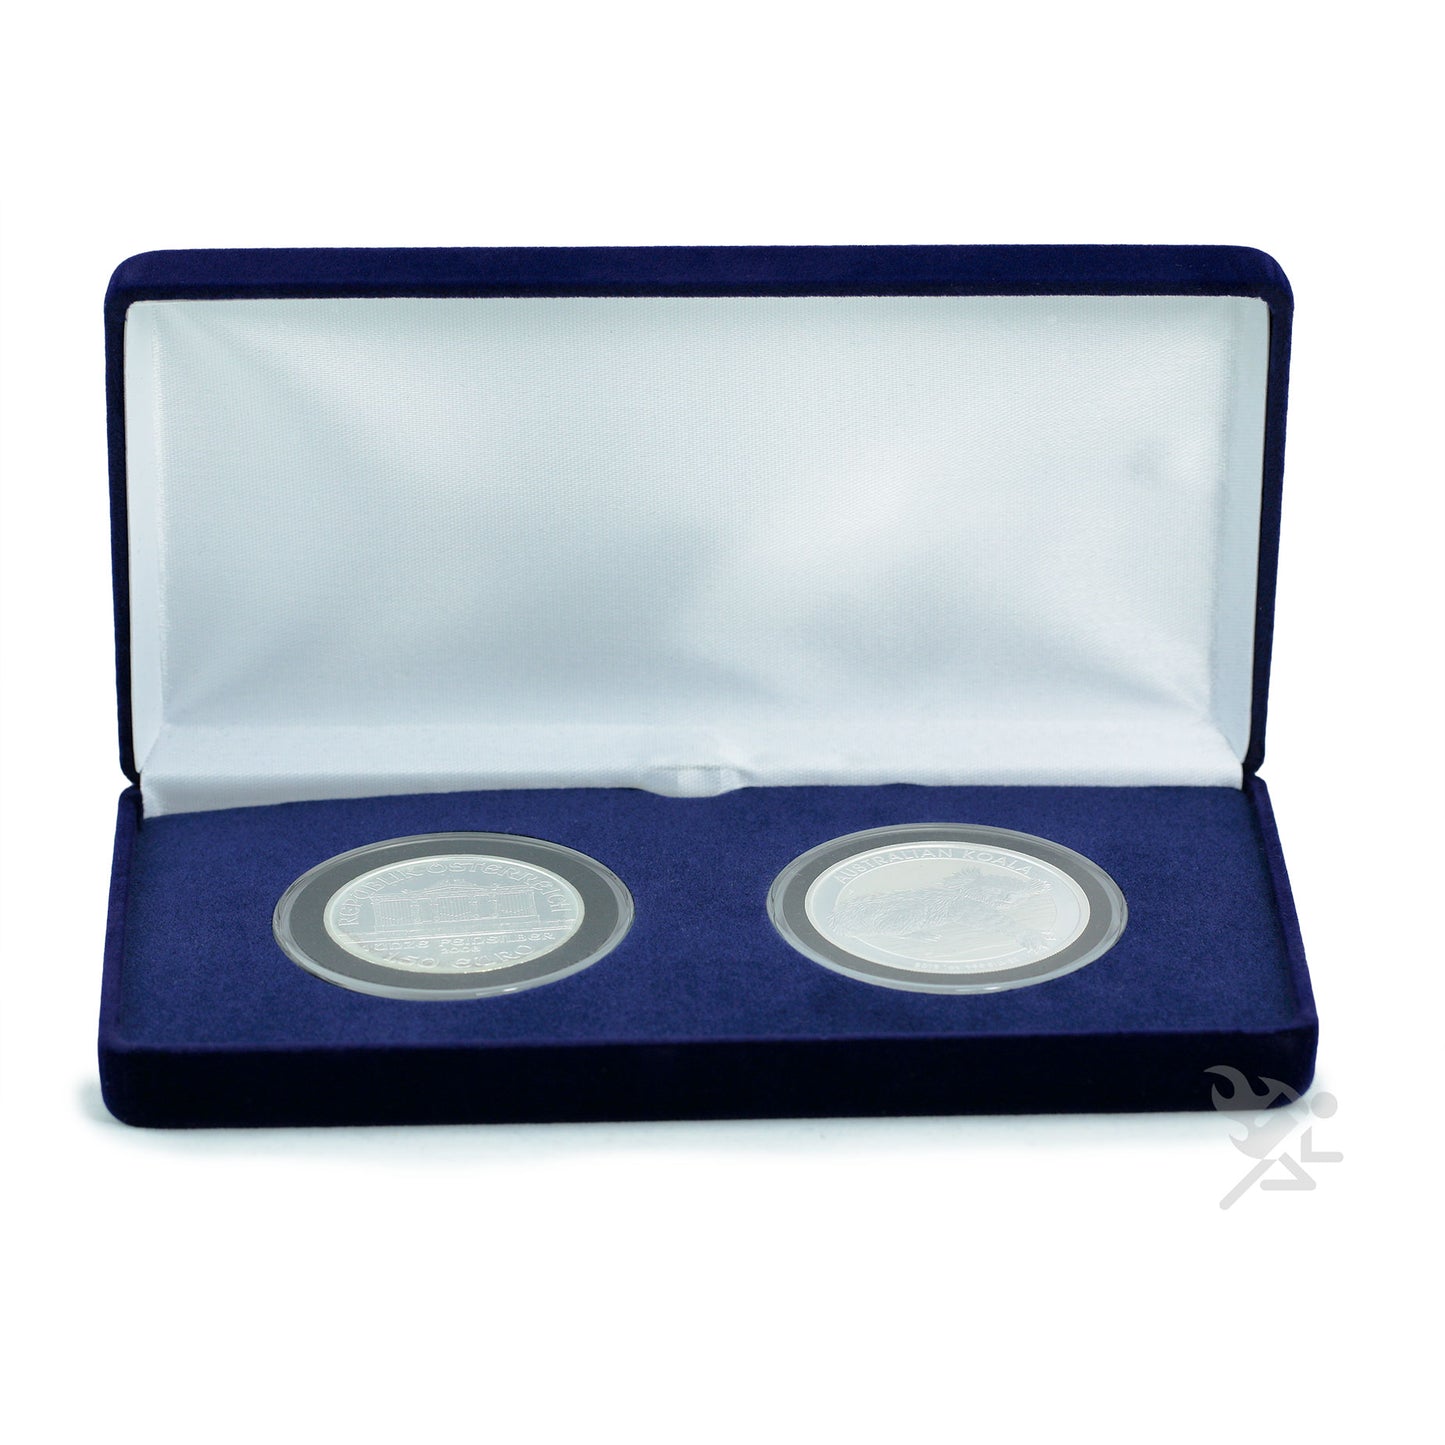 Double Coin Display Box for AirTite XL - Model "I" Coin Holders